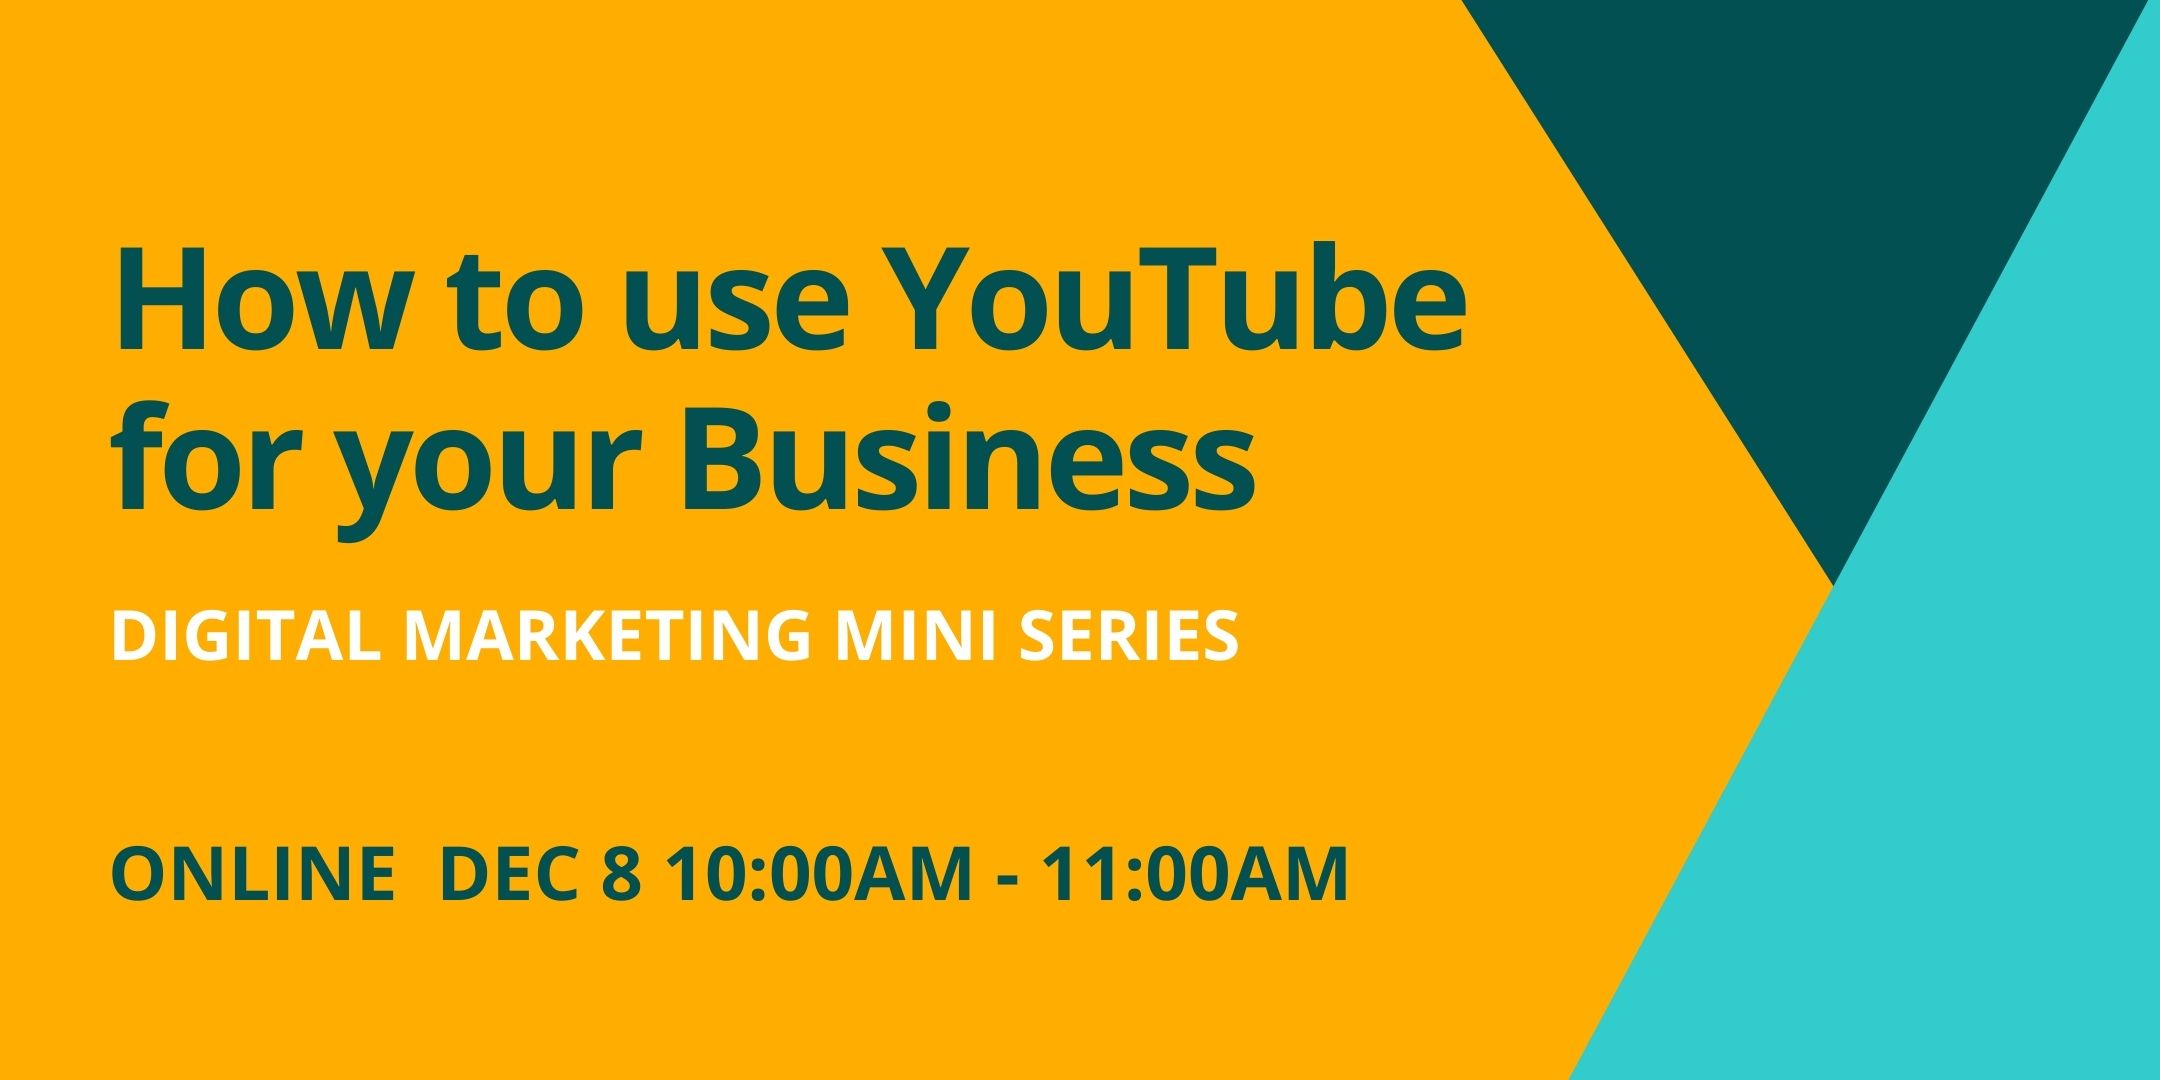 You are currently viewing Digital Marketing: How to Use YouTube for Your Business – Webinar Dec 8